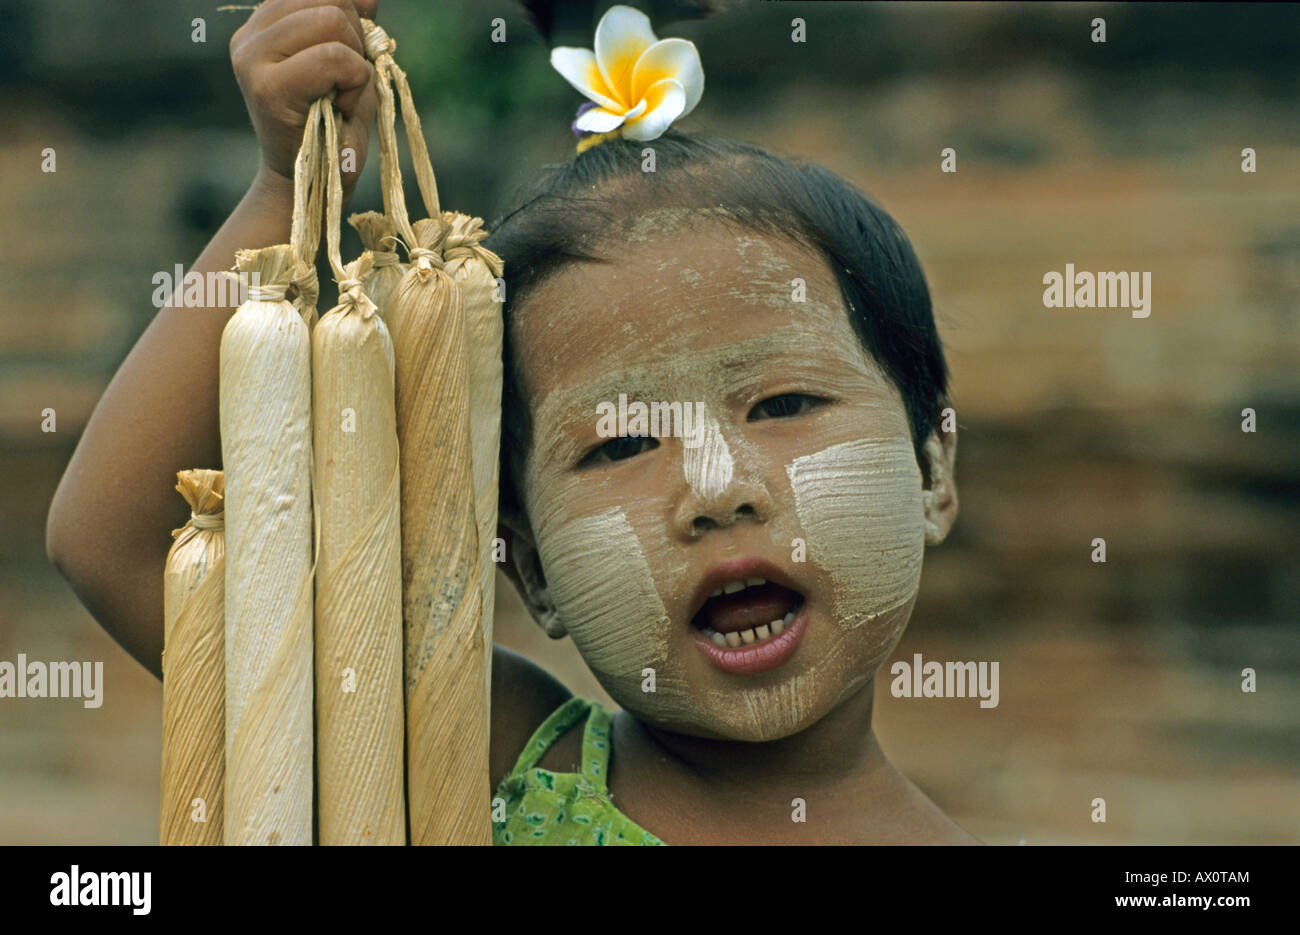 Girl with her face painted in the traditional Tanaka style selling cherrots, Myanmar (Burma), Southeast Asia Stock Photo